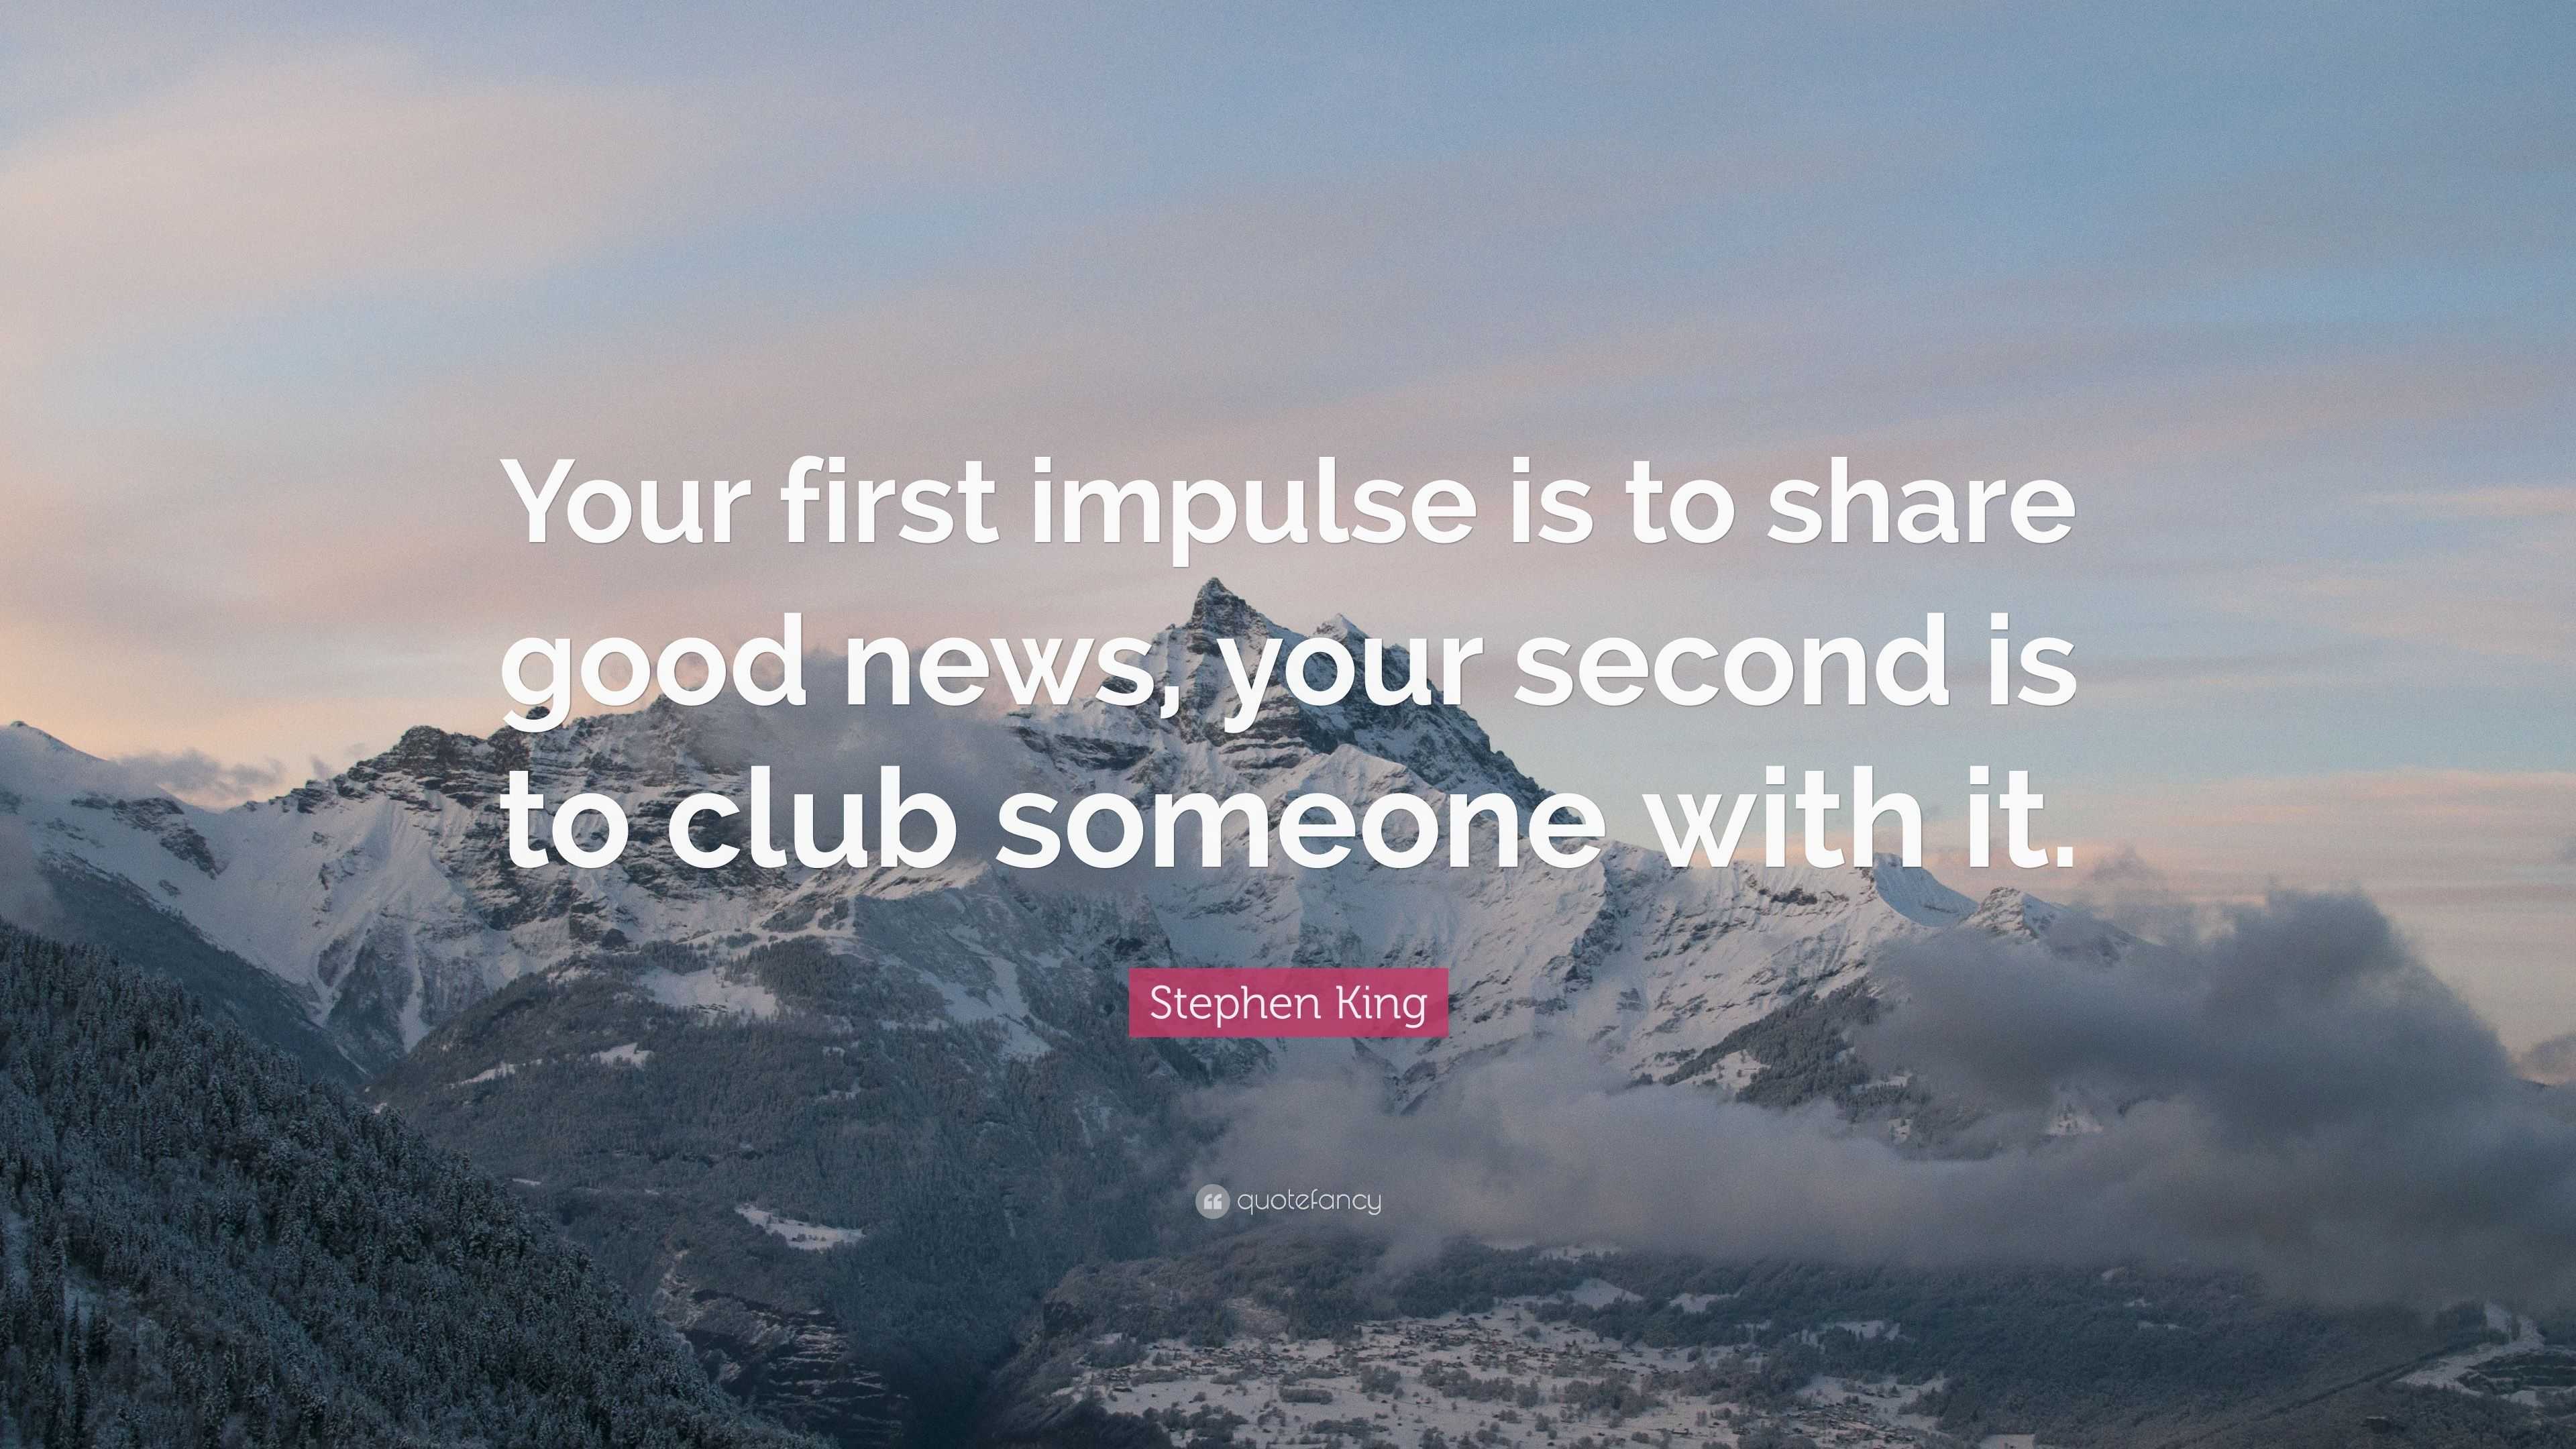 Stephen King Quote: “Your first impulse is to share good news, your ...